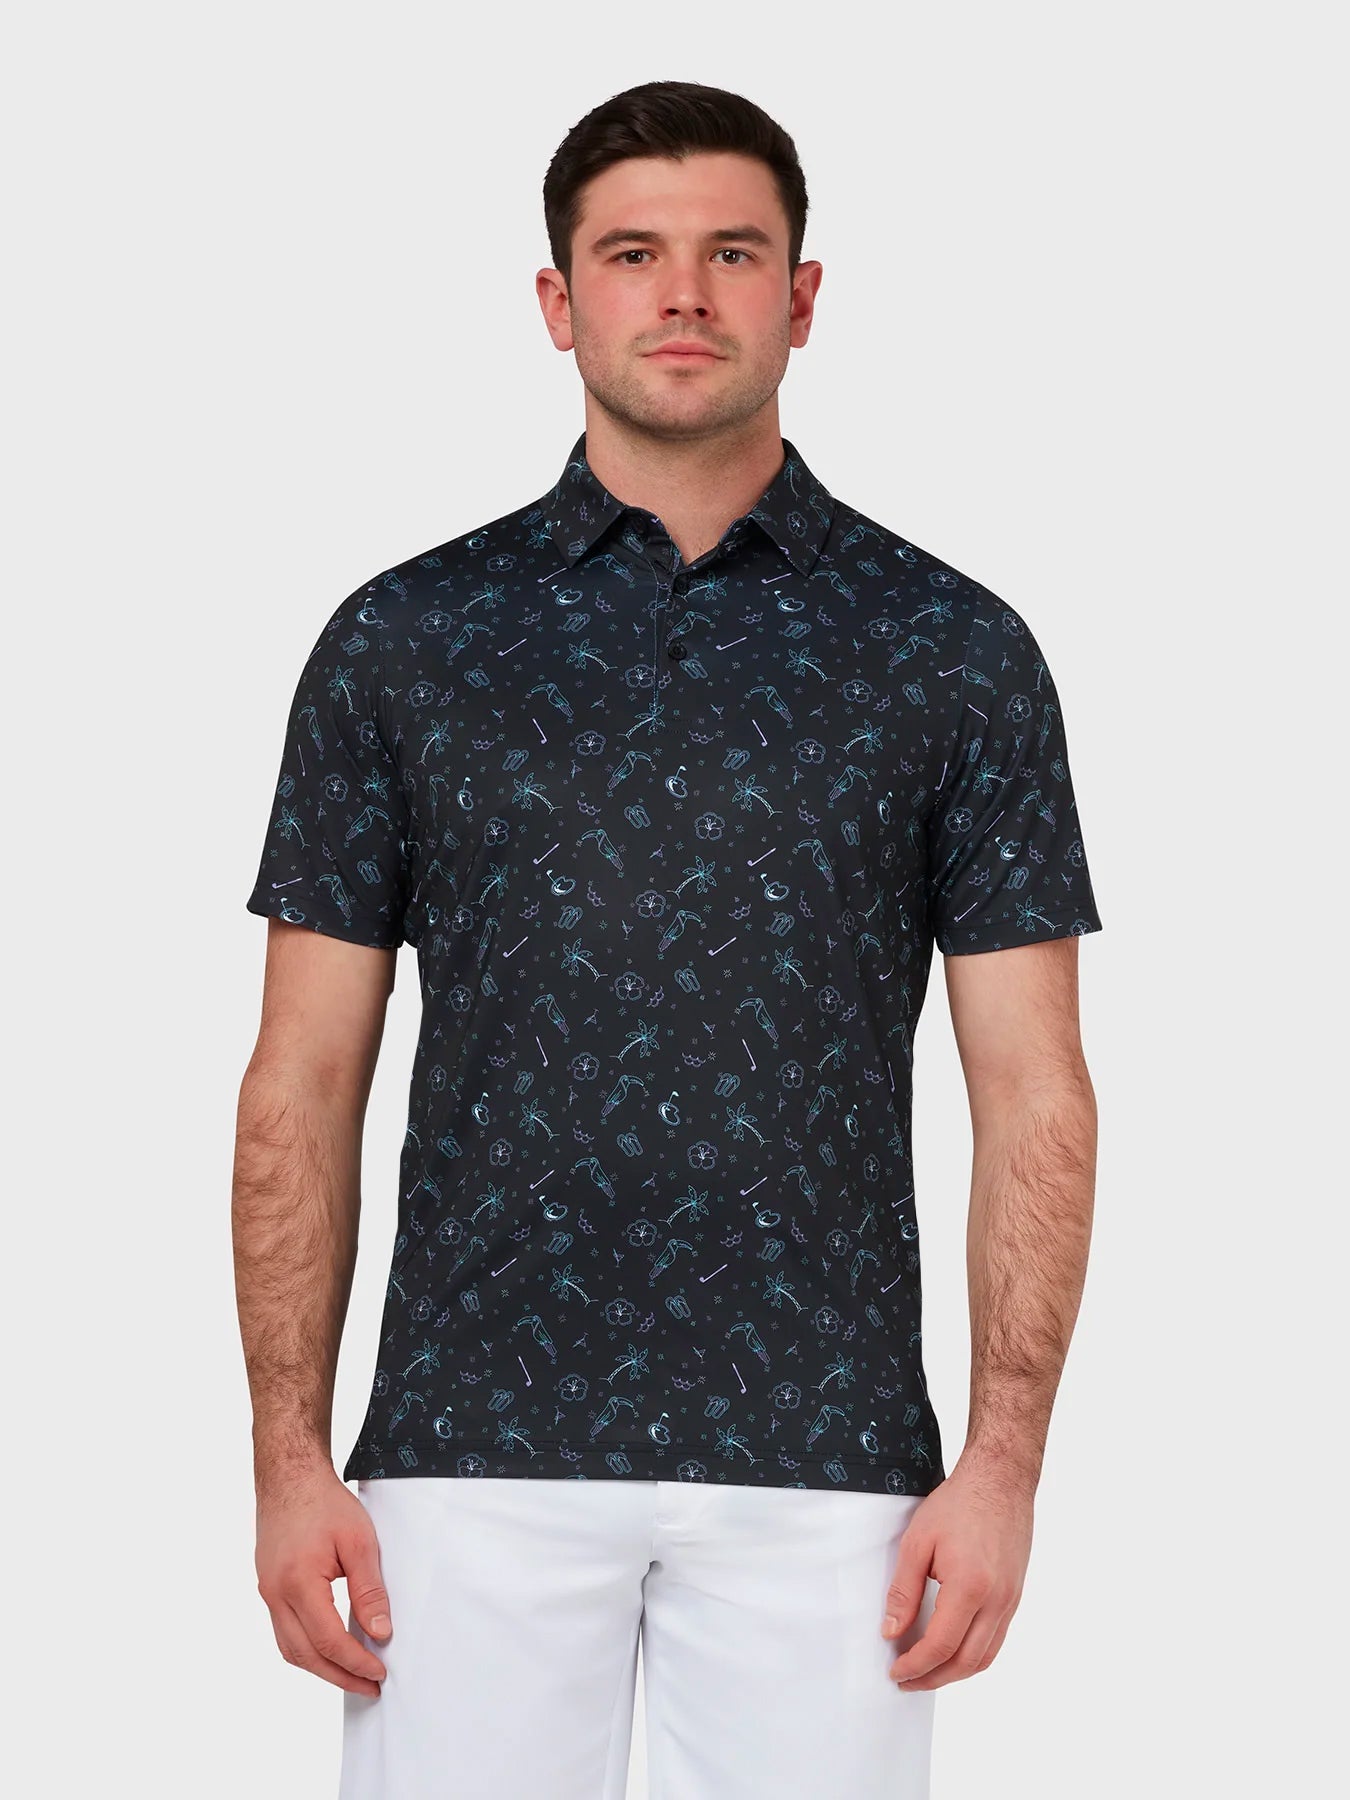 View All Over Golf Tucan Print Polo In Caviar Caviar S information